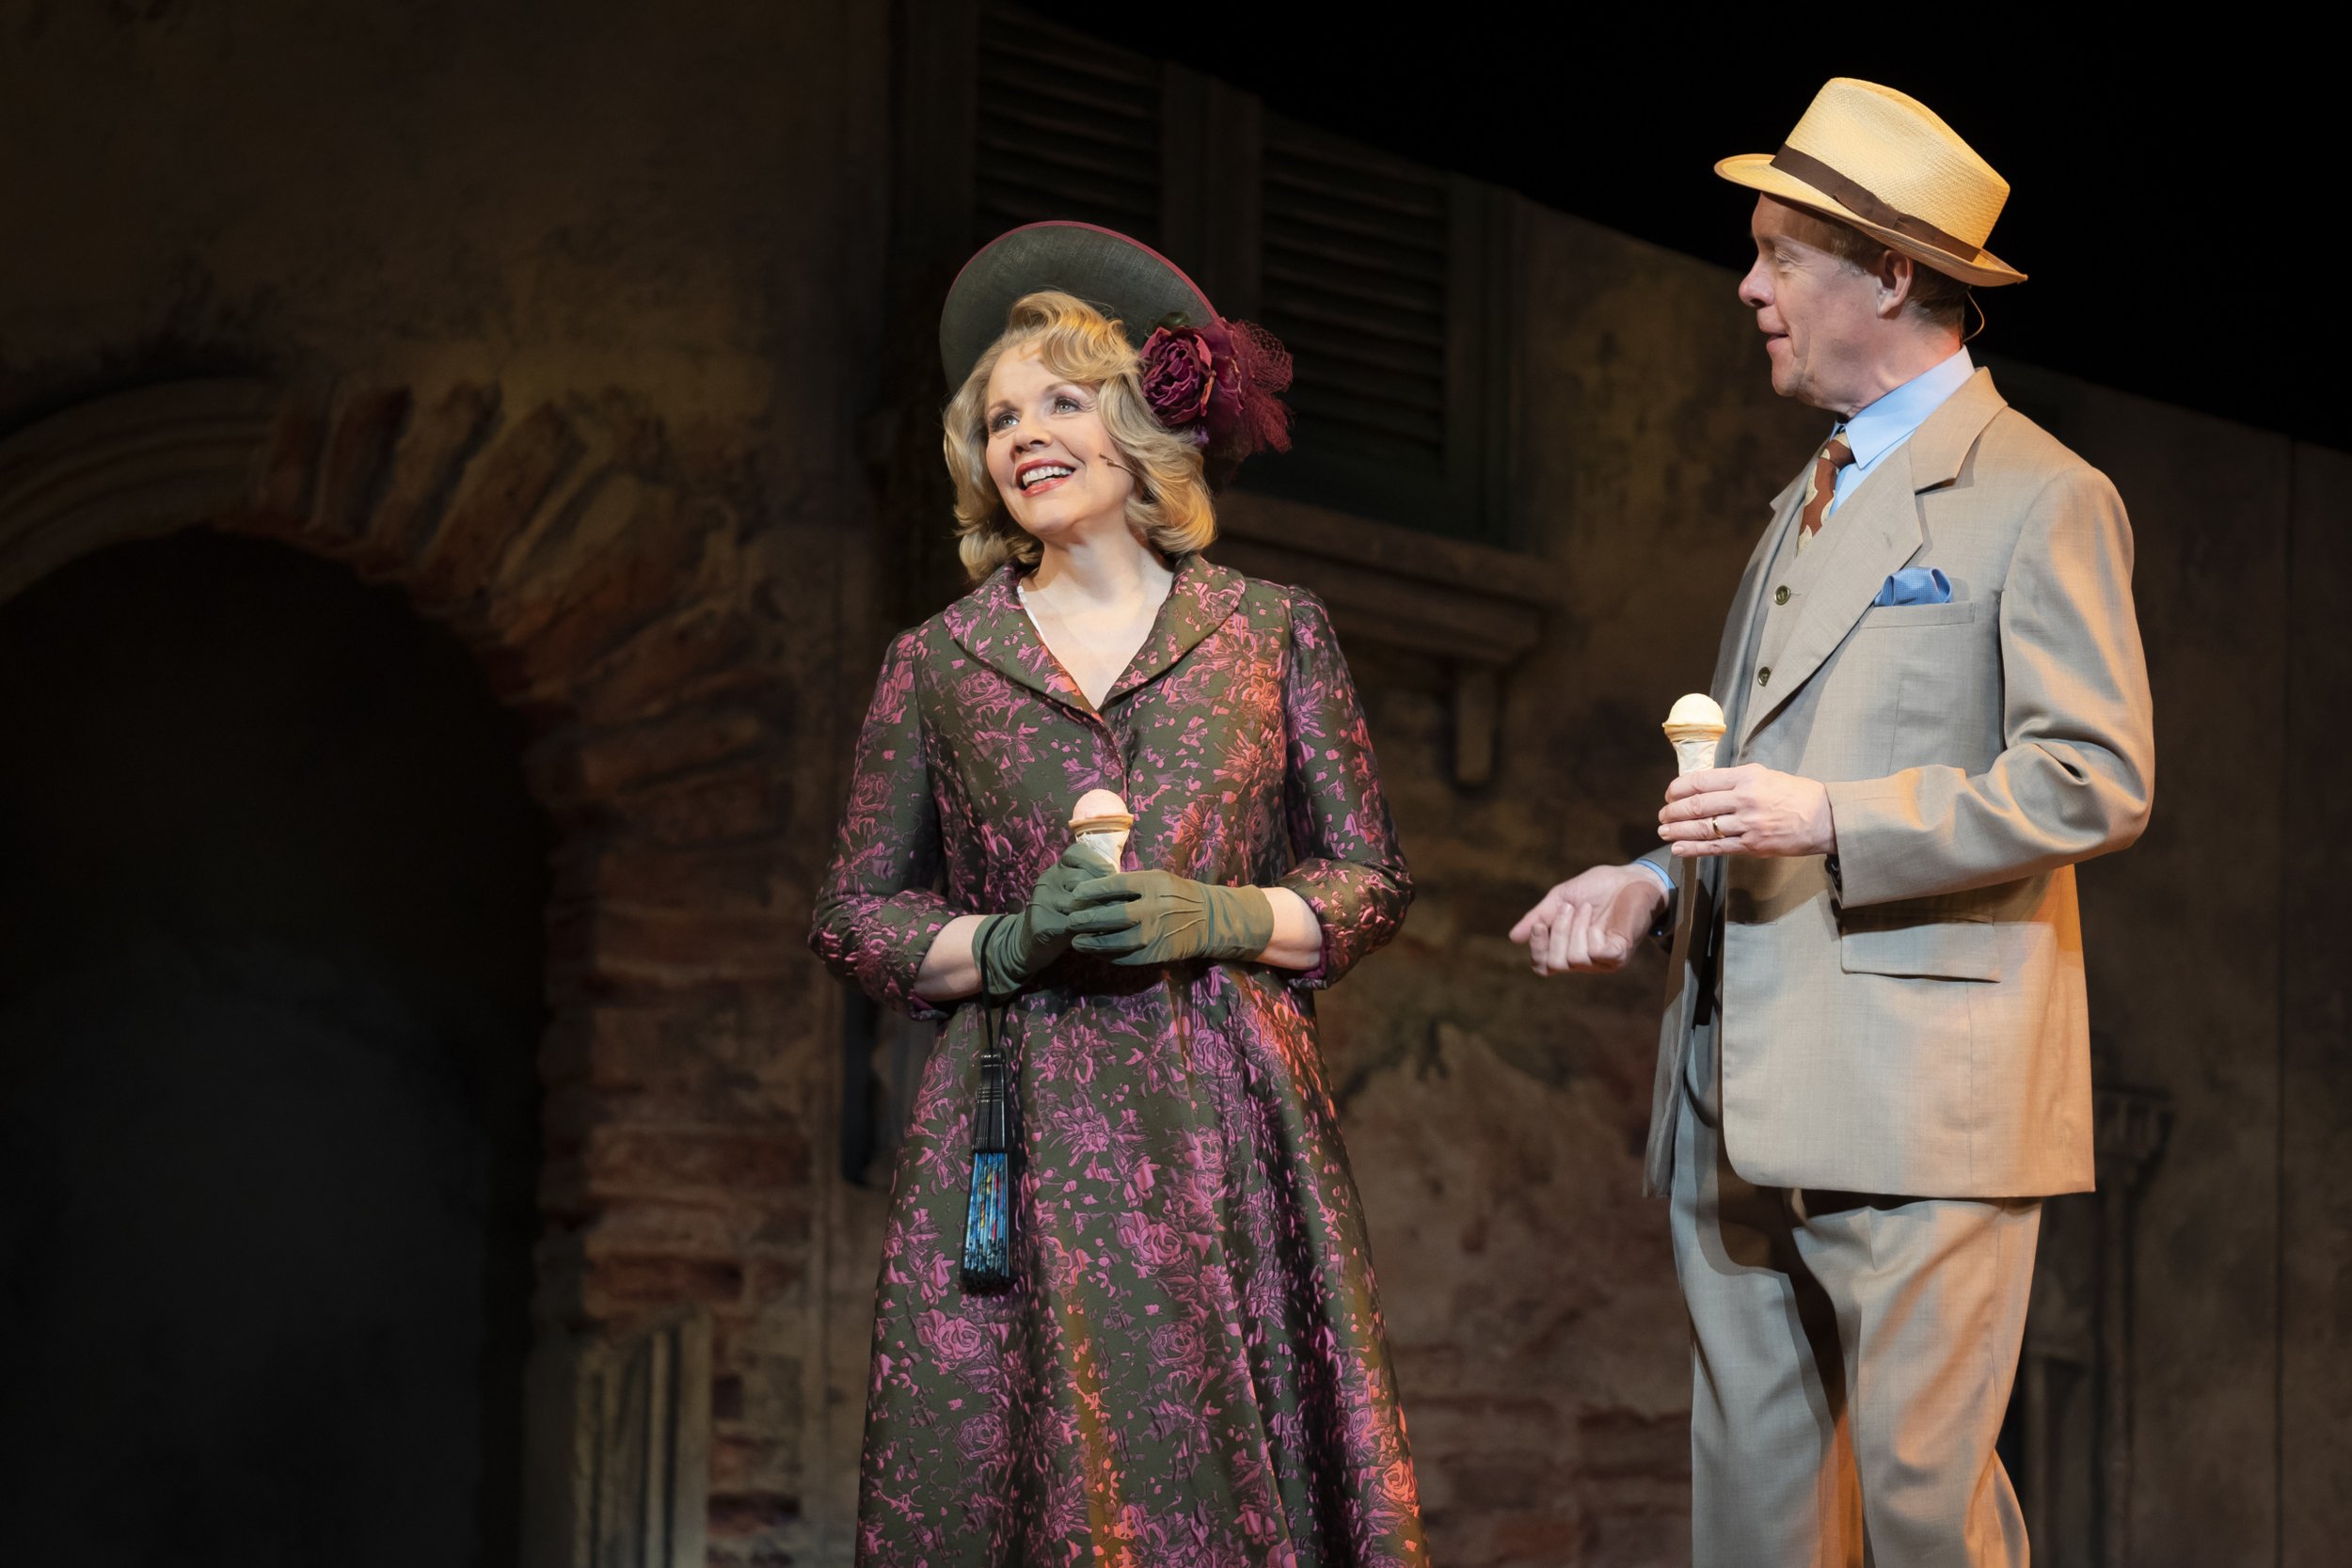 2_Renée-Fleming-and-Alex-Jennings-in-the-Scenario-Two-production-of-The-Light-in-the-Piazza-at-Lyric-Opera-House_Credit-Liz-Lauren-scaled.jpeg